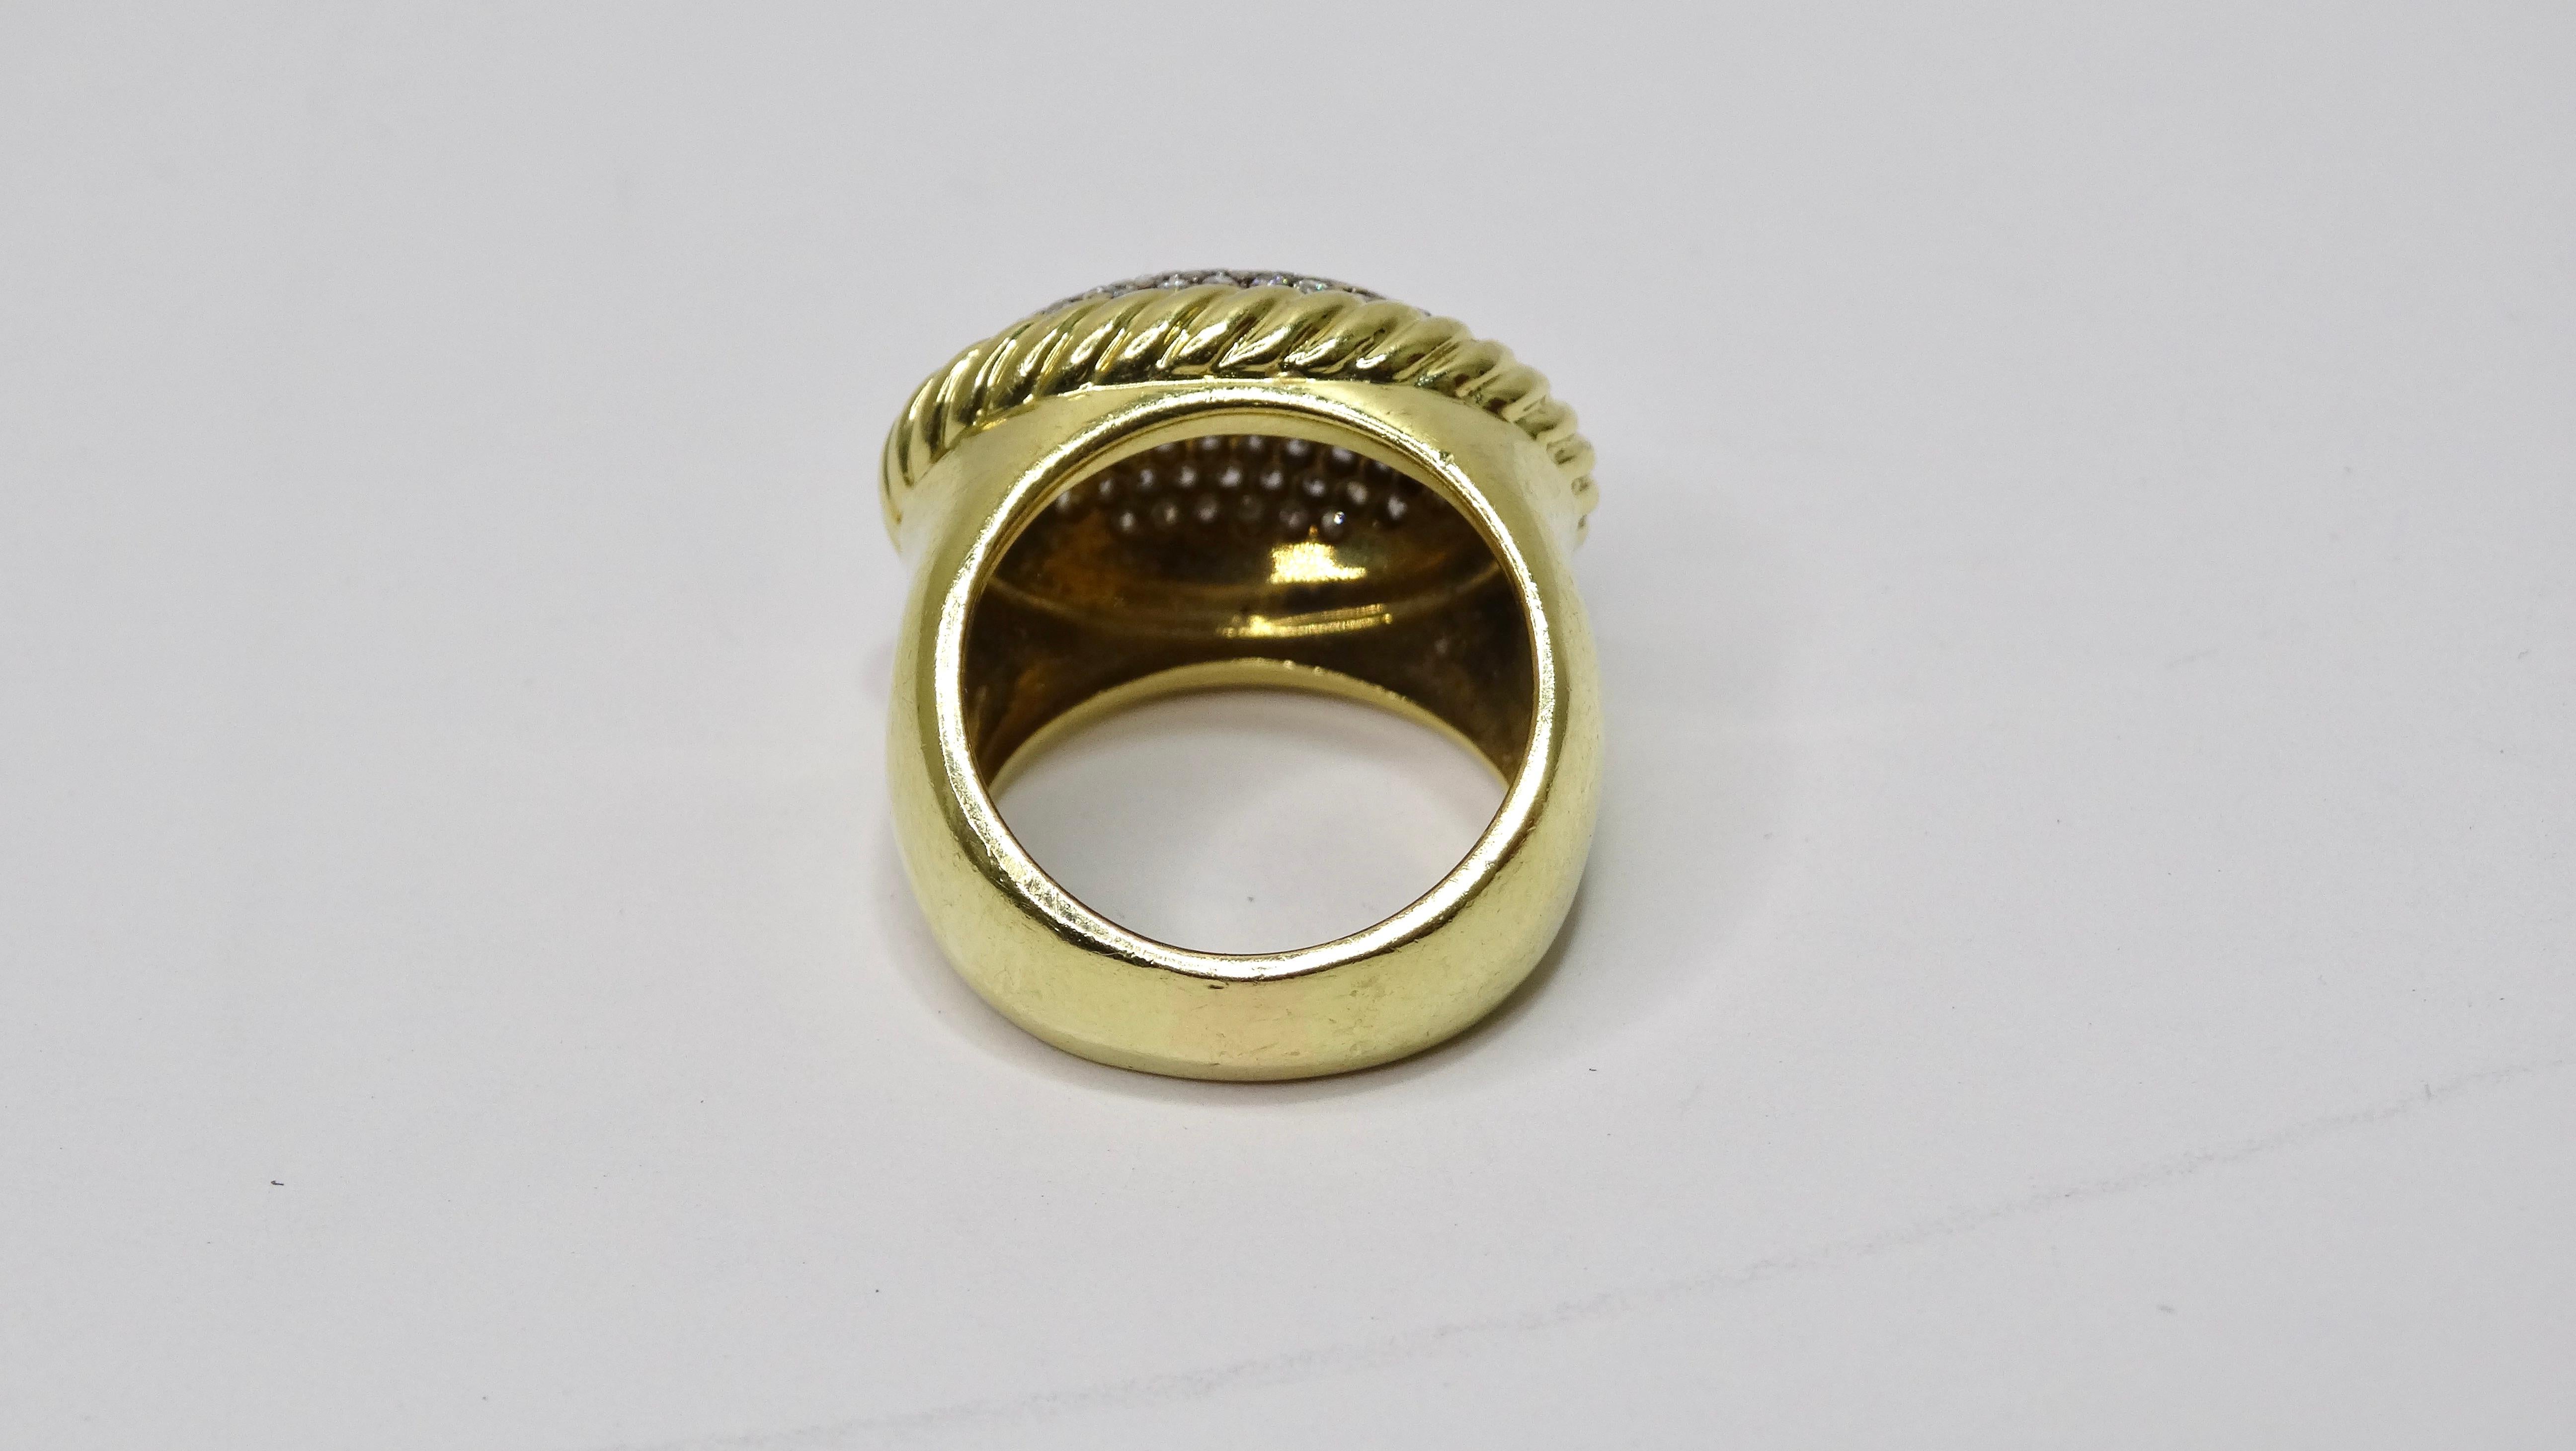 David Yurman Albion Diamond Ring in 18k Gold In Excellent Condition For Sale In Scottsdale, AZ